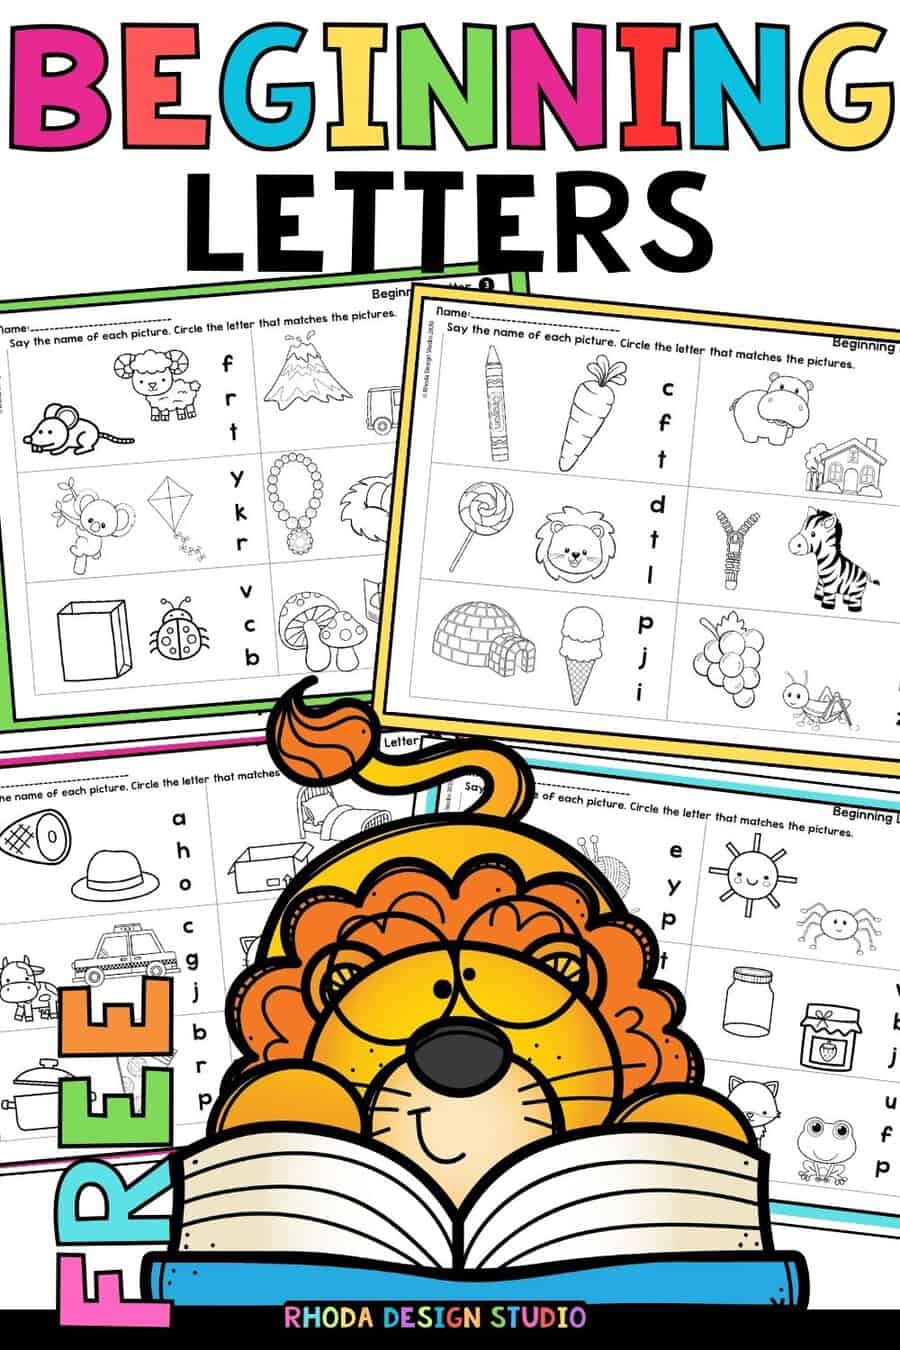 Preschool printable worksheets help children engage in early learning. Young children are filled with curiosity and a natural desire to learn.